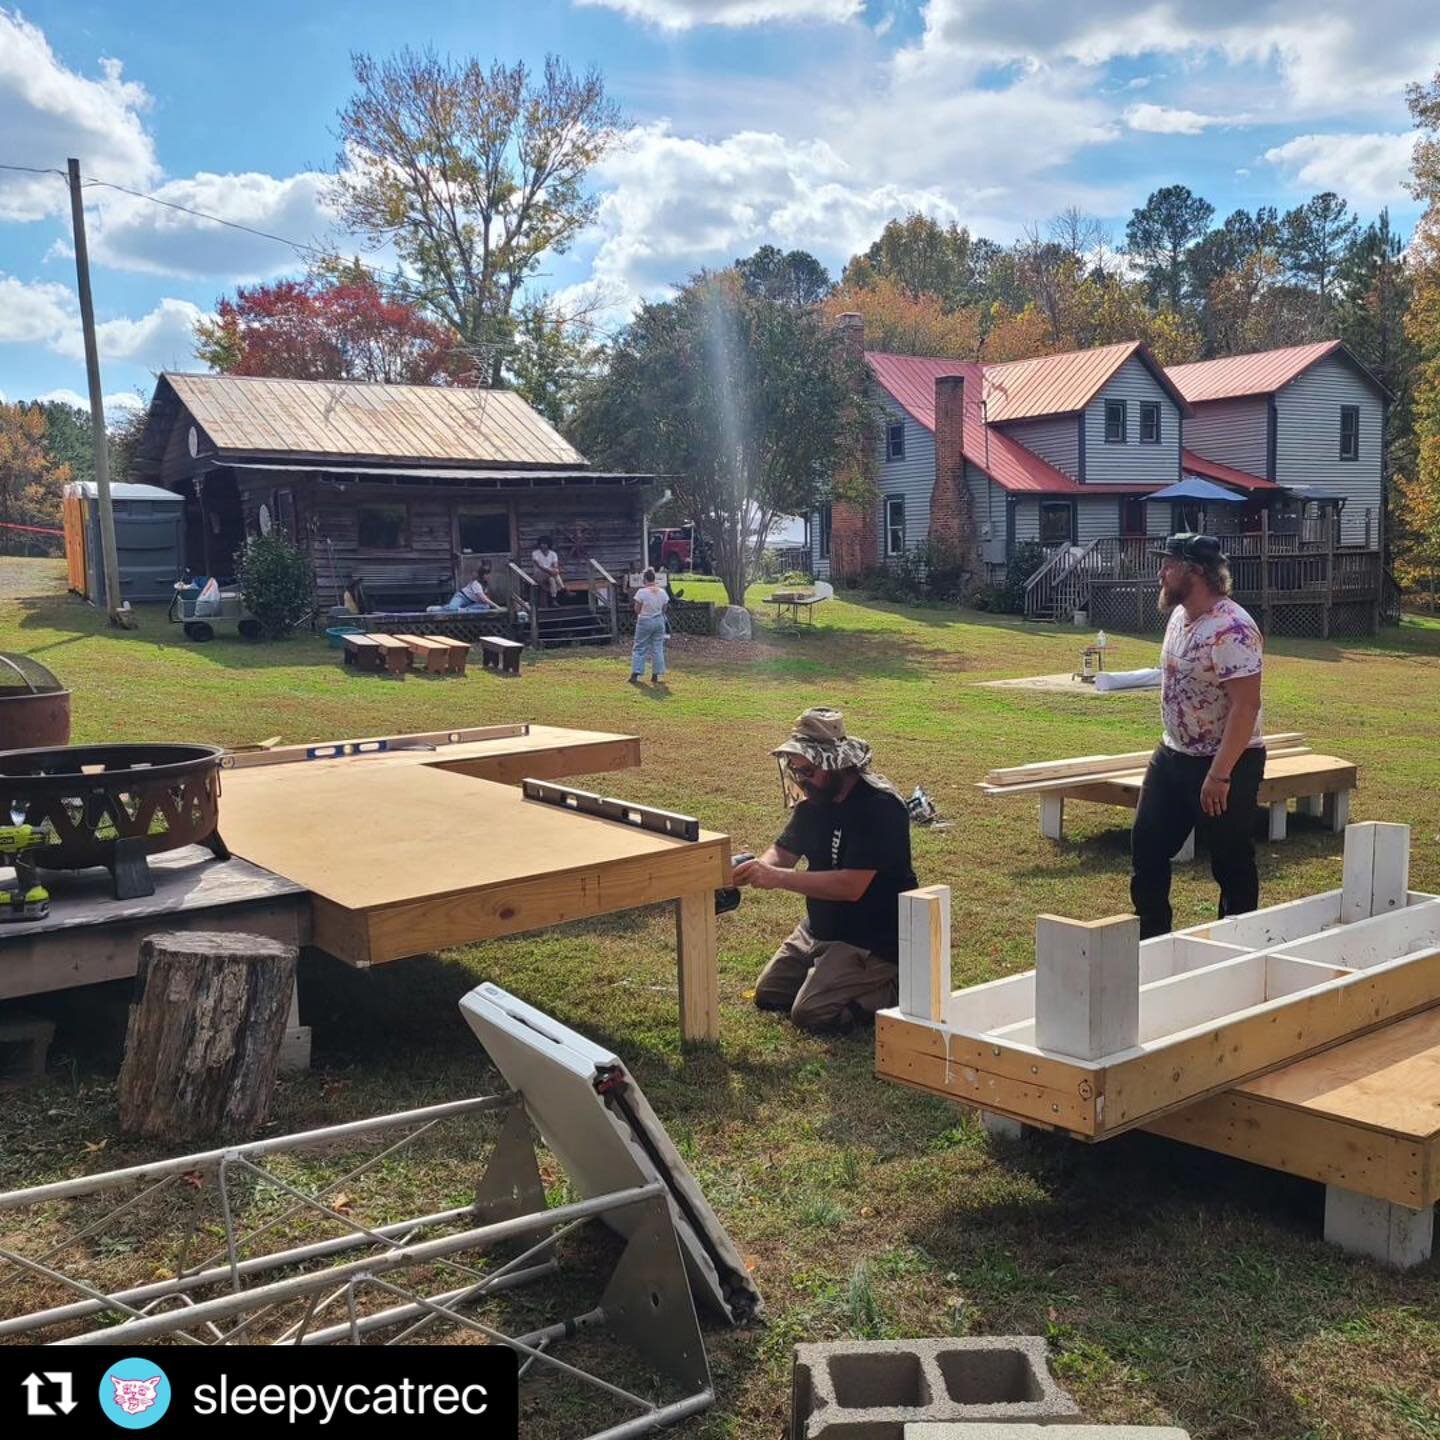 #Repost @sleepycatrec with @use.repost
・・・
Good work day at @downyonderfarm with this dream squad! Already filled with love and gratitude for everyone in our community. Can't wait to share Sleepy Fest with everyone tomorrow.

🔗☝🏽tickets and info. O